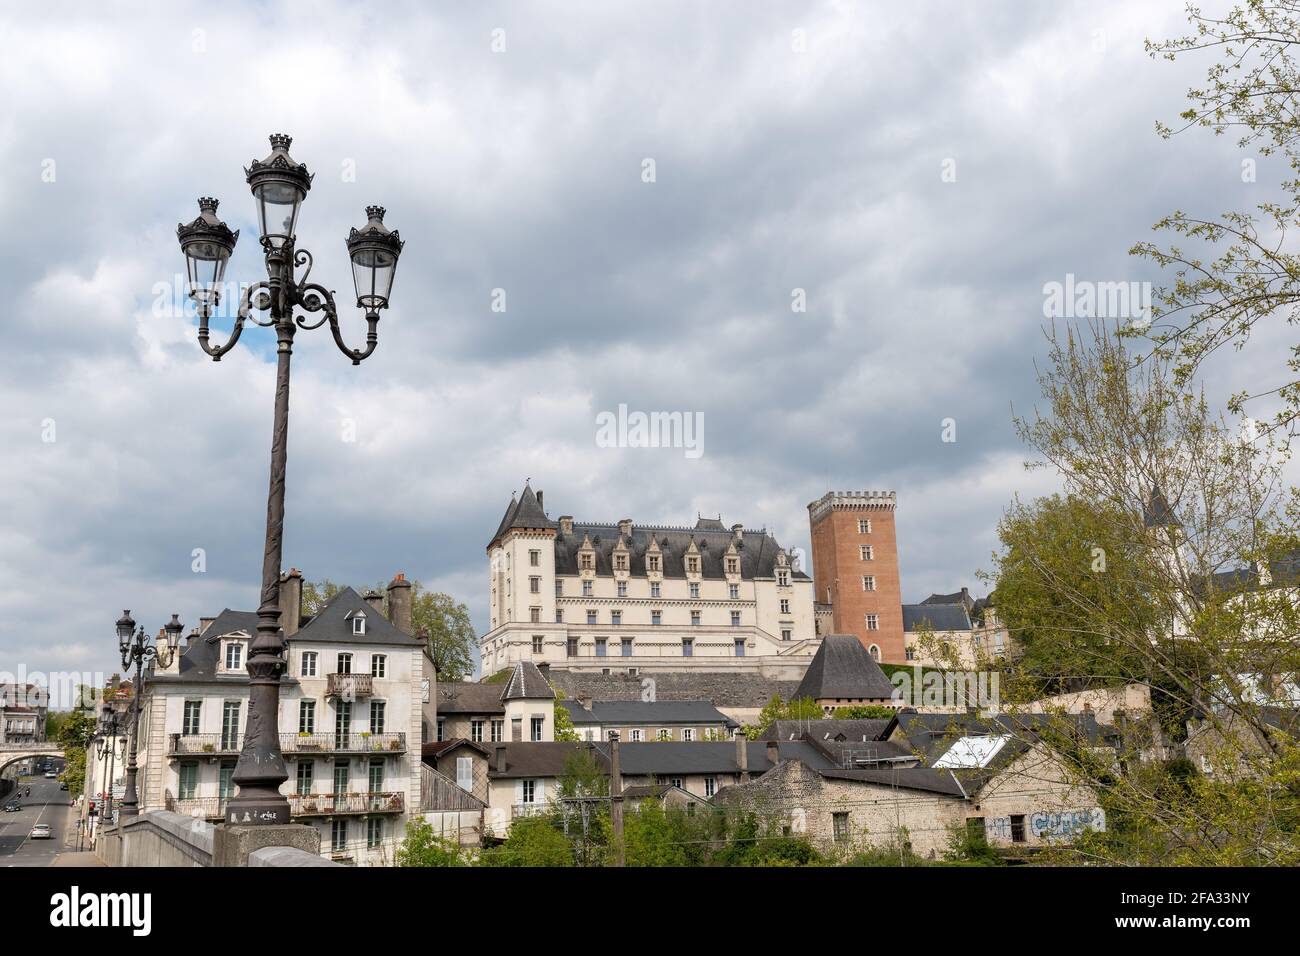 Castle of henry IV in pau, aquitaine france Stock Photo